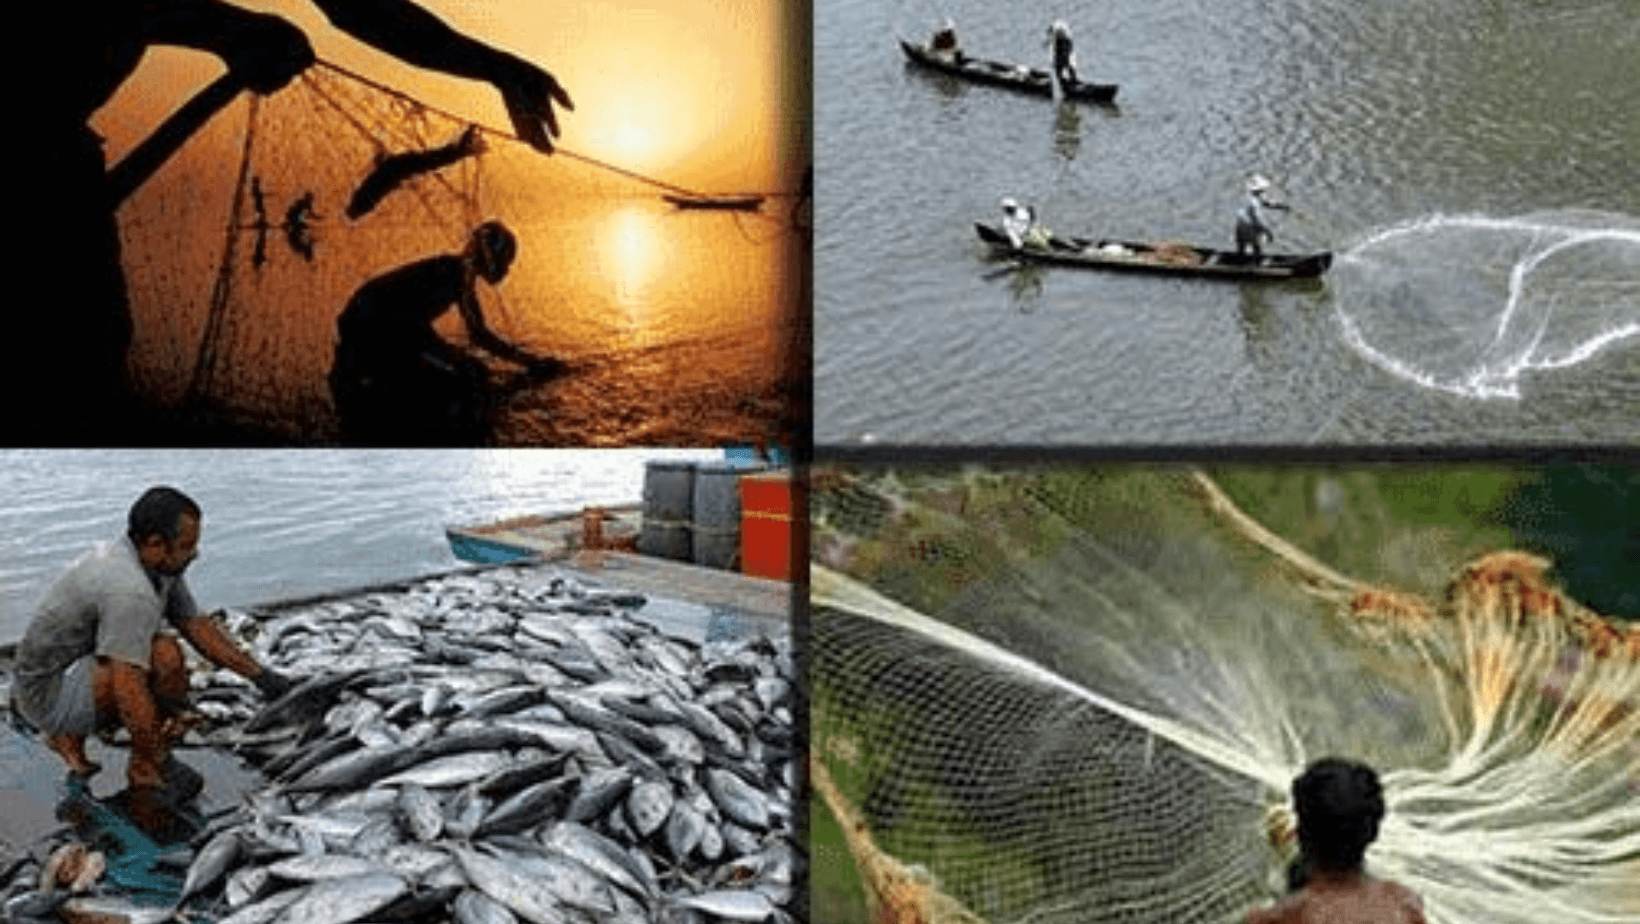 Uttar Pradesh bags First Prize for Best State in Inland Fisheries